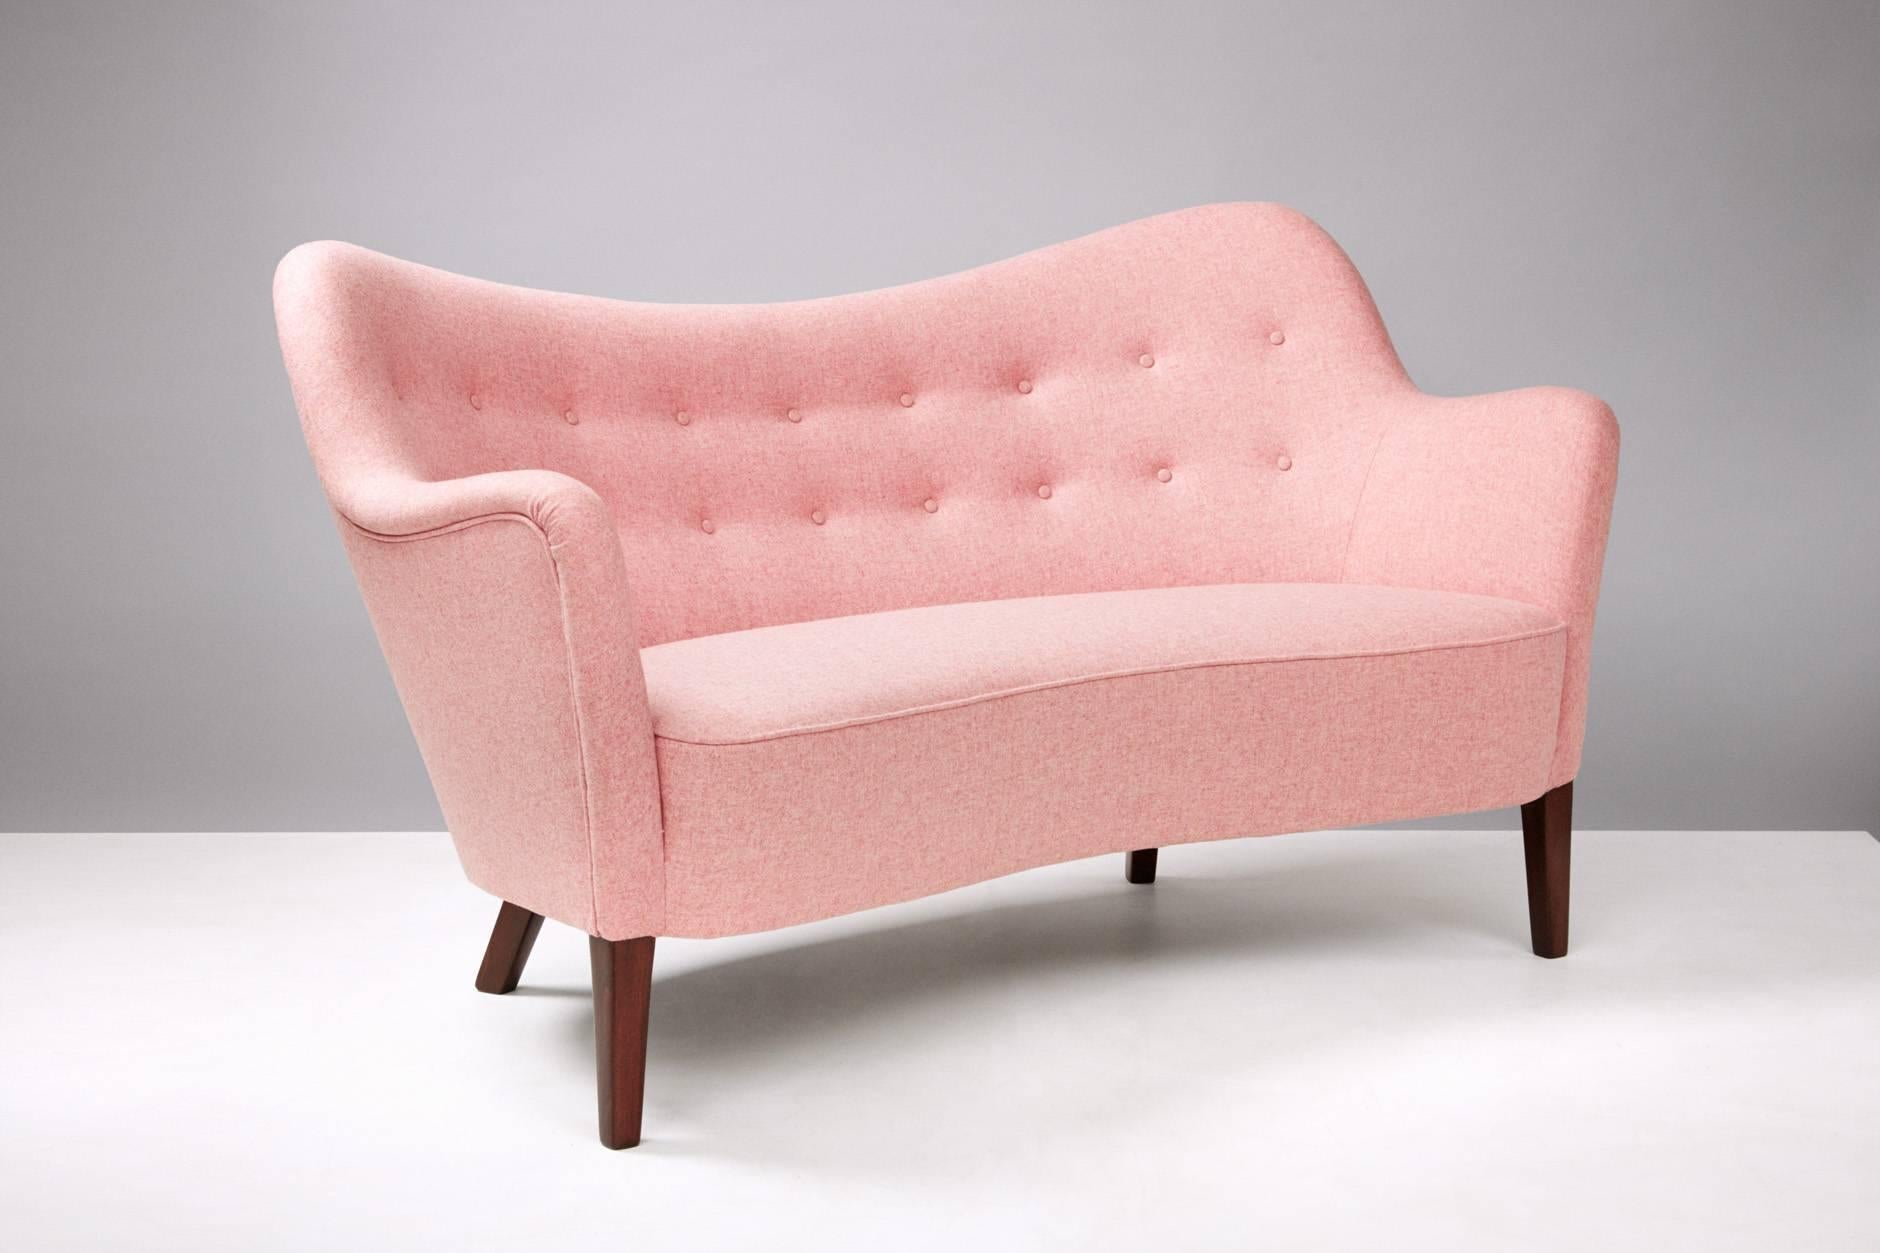 Model 185 sofa, 1952

Rarely seen curved love-seat sofa from unknown designer for Danish cabinetmakers Slagelse Mobler. Often attributed to Nanna Ditzel. Stained beech legs and new wool felt upholstery from Abraham Moon.